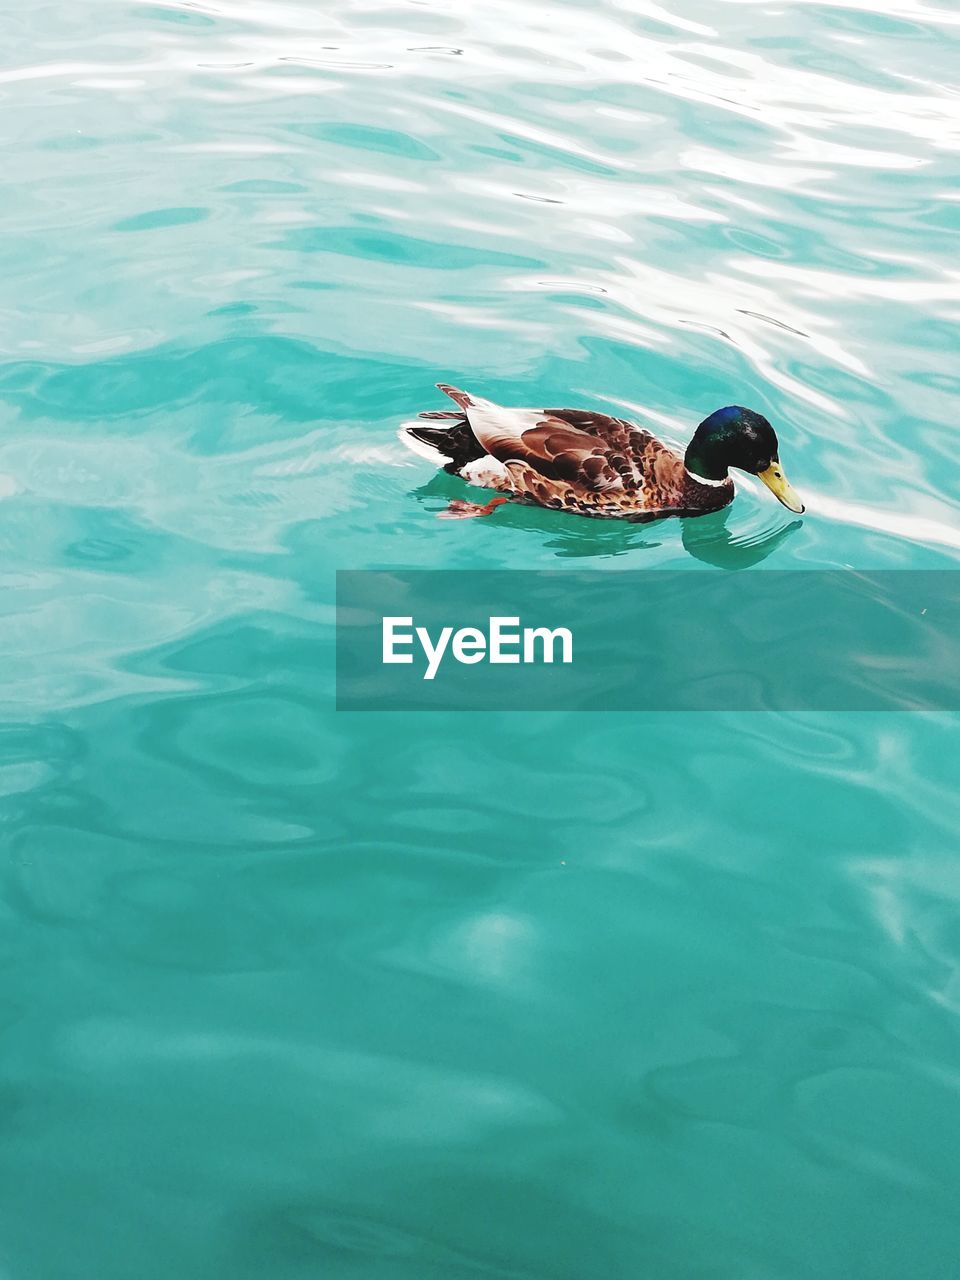 HIGH ANGLE VIEW OF DUCK SWIMMING IN POOL